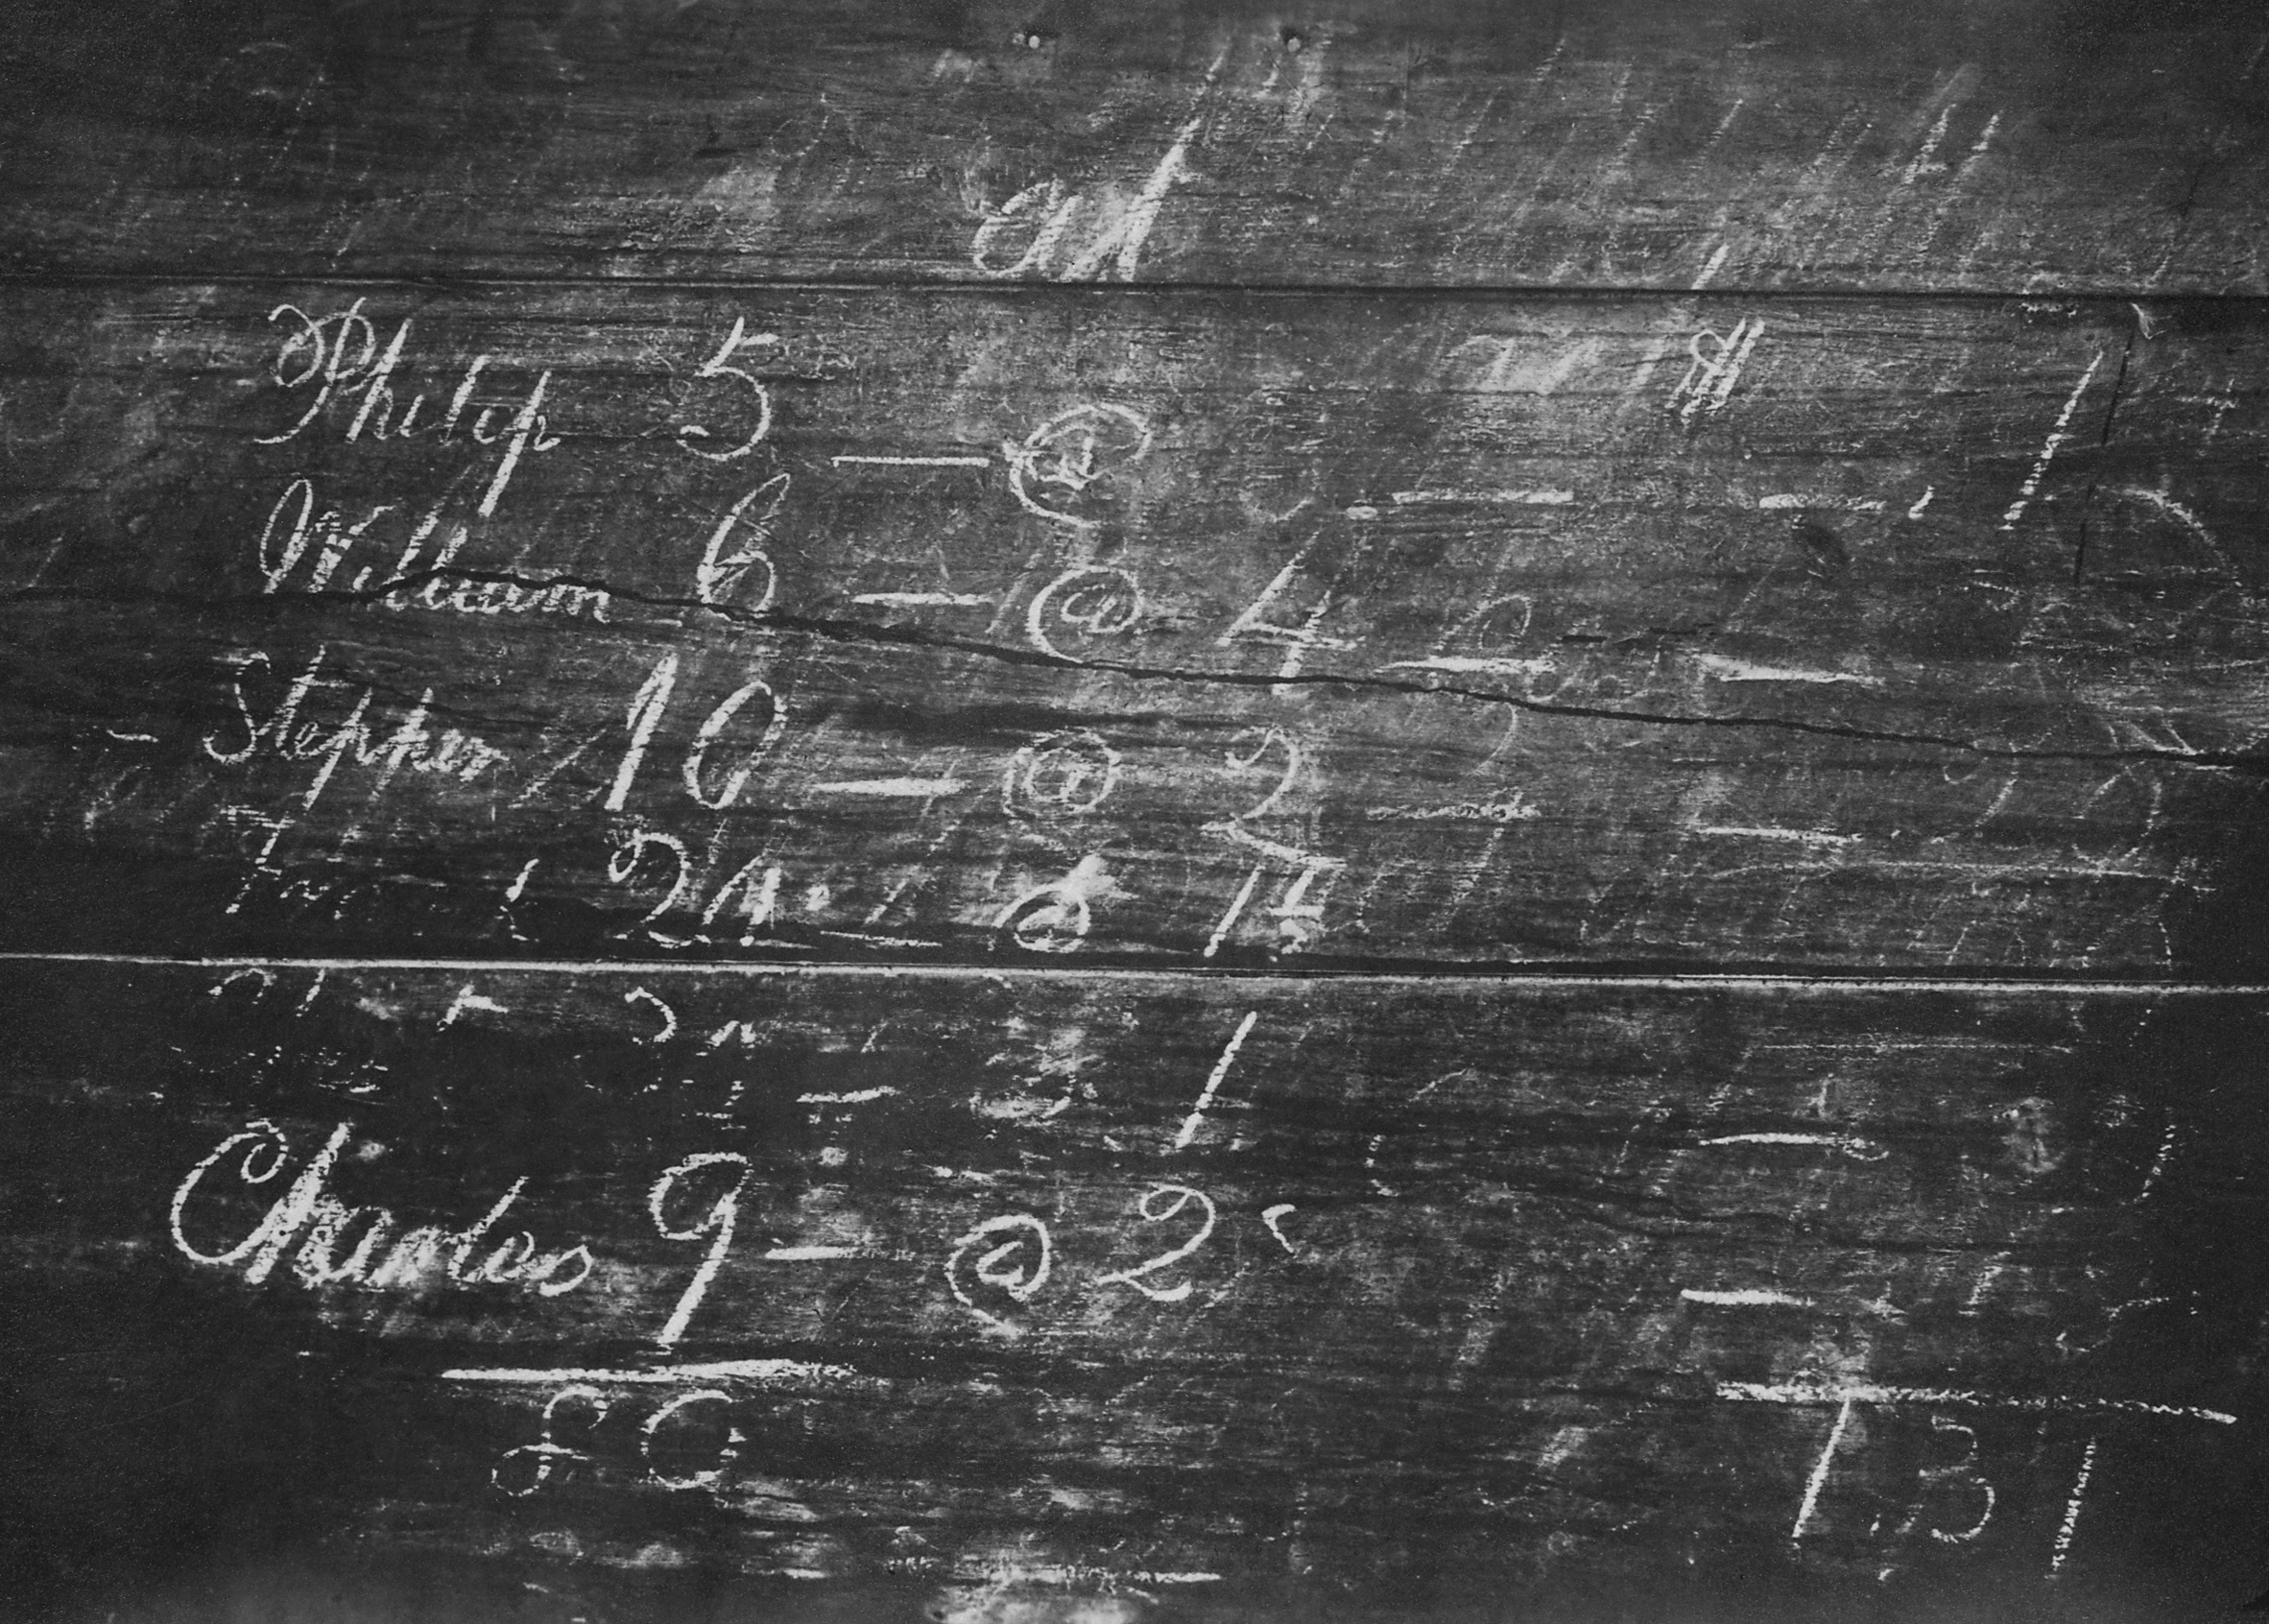 Black and white photograph of a chalkboard